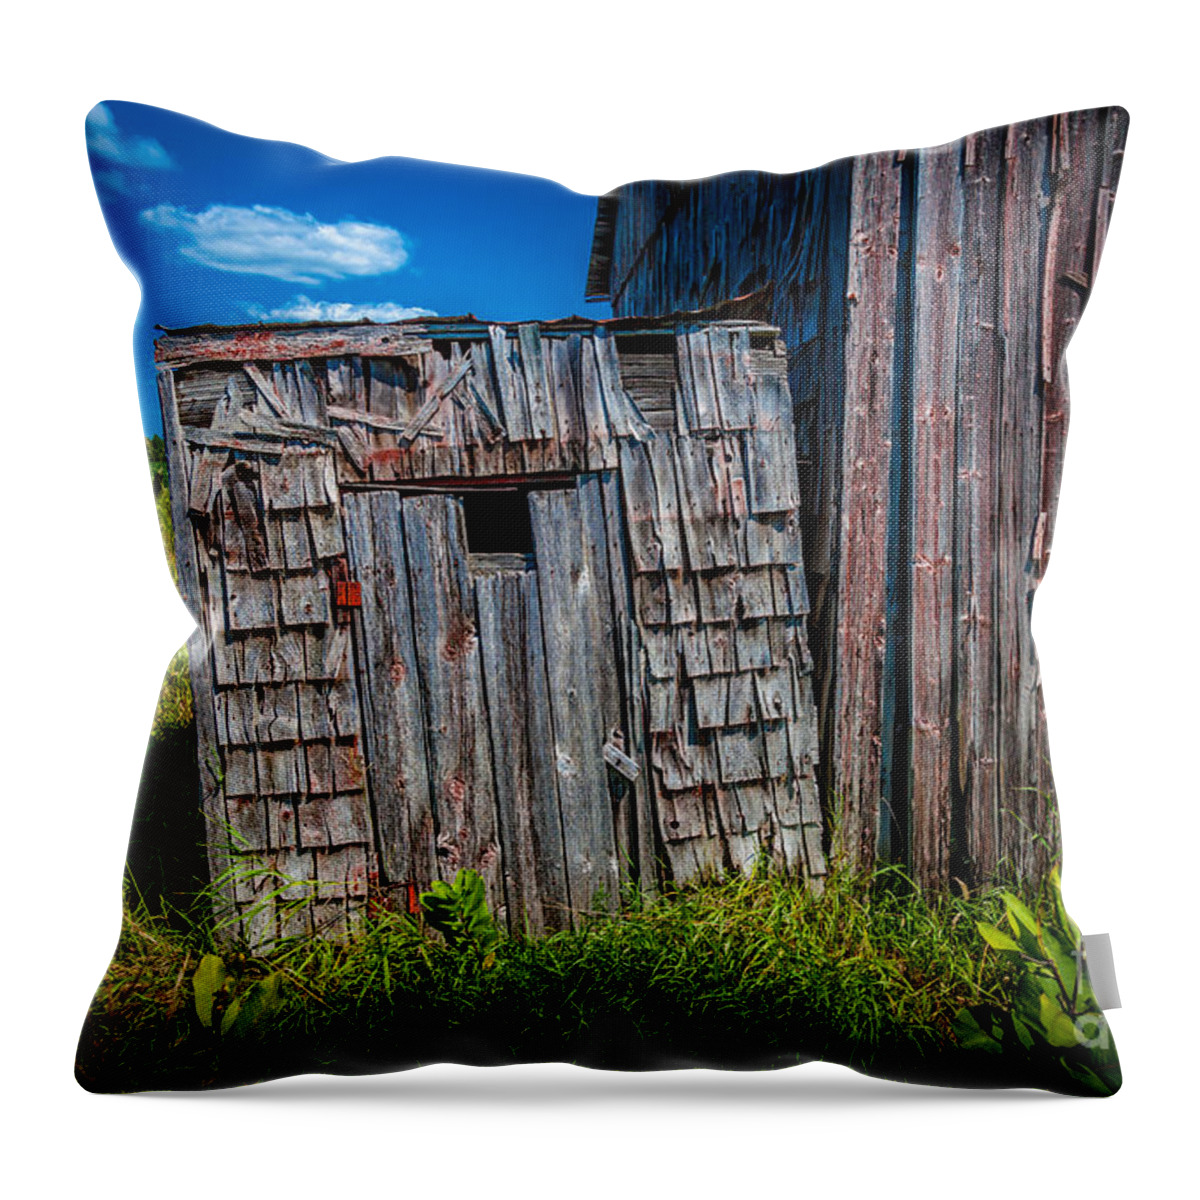 Abandoned Throw Pillow featuring the photograph Tiny Privy by Roger Monahan